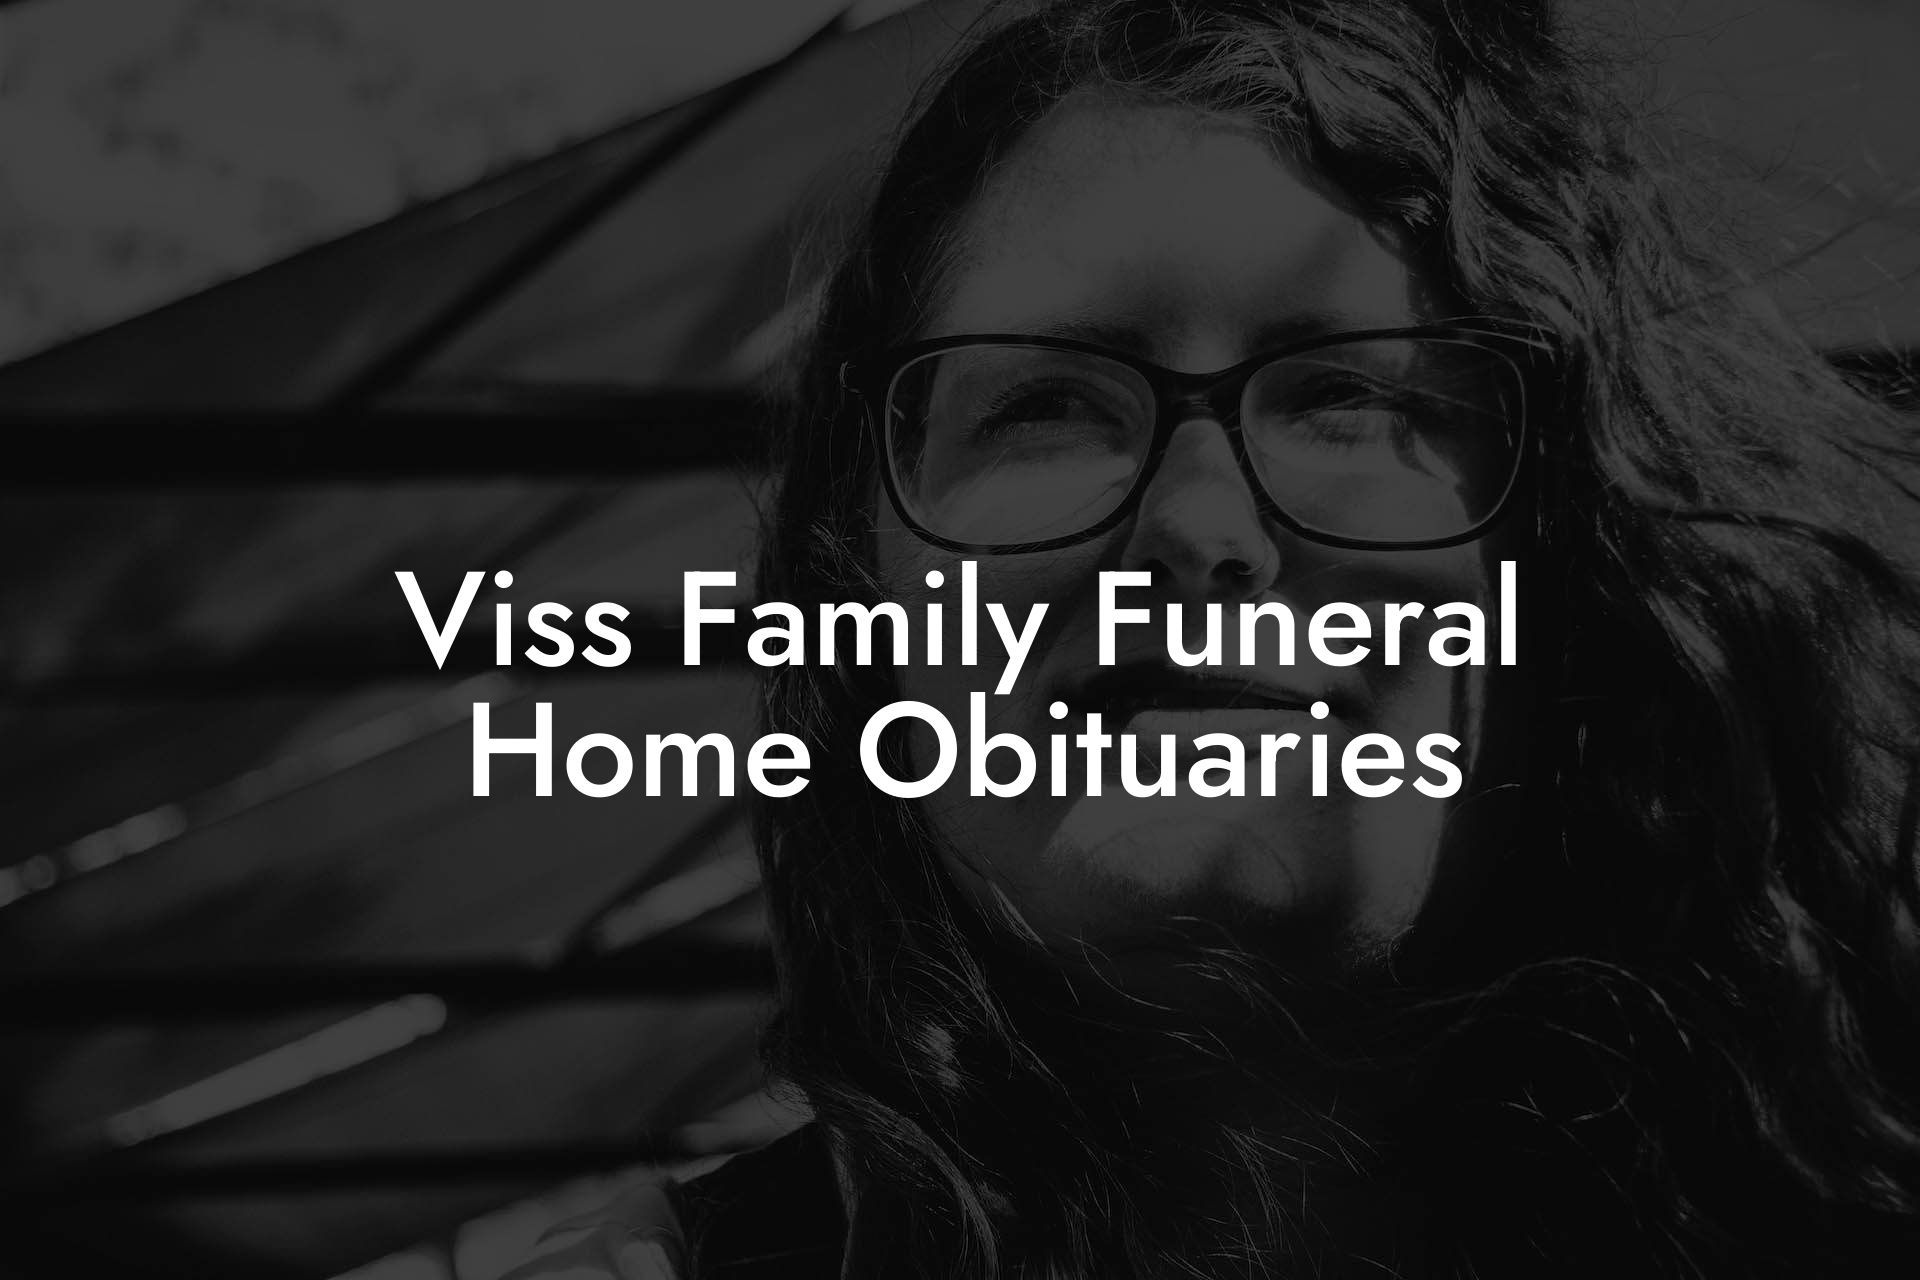 Viss Family Funeral Home Obituaries